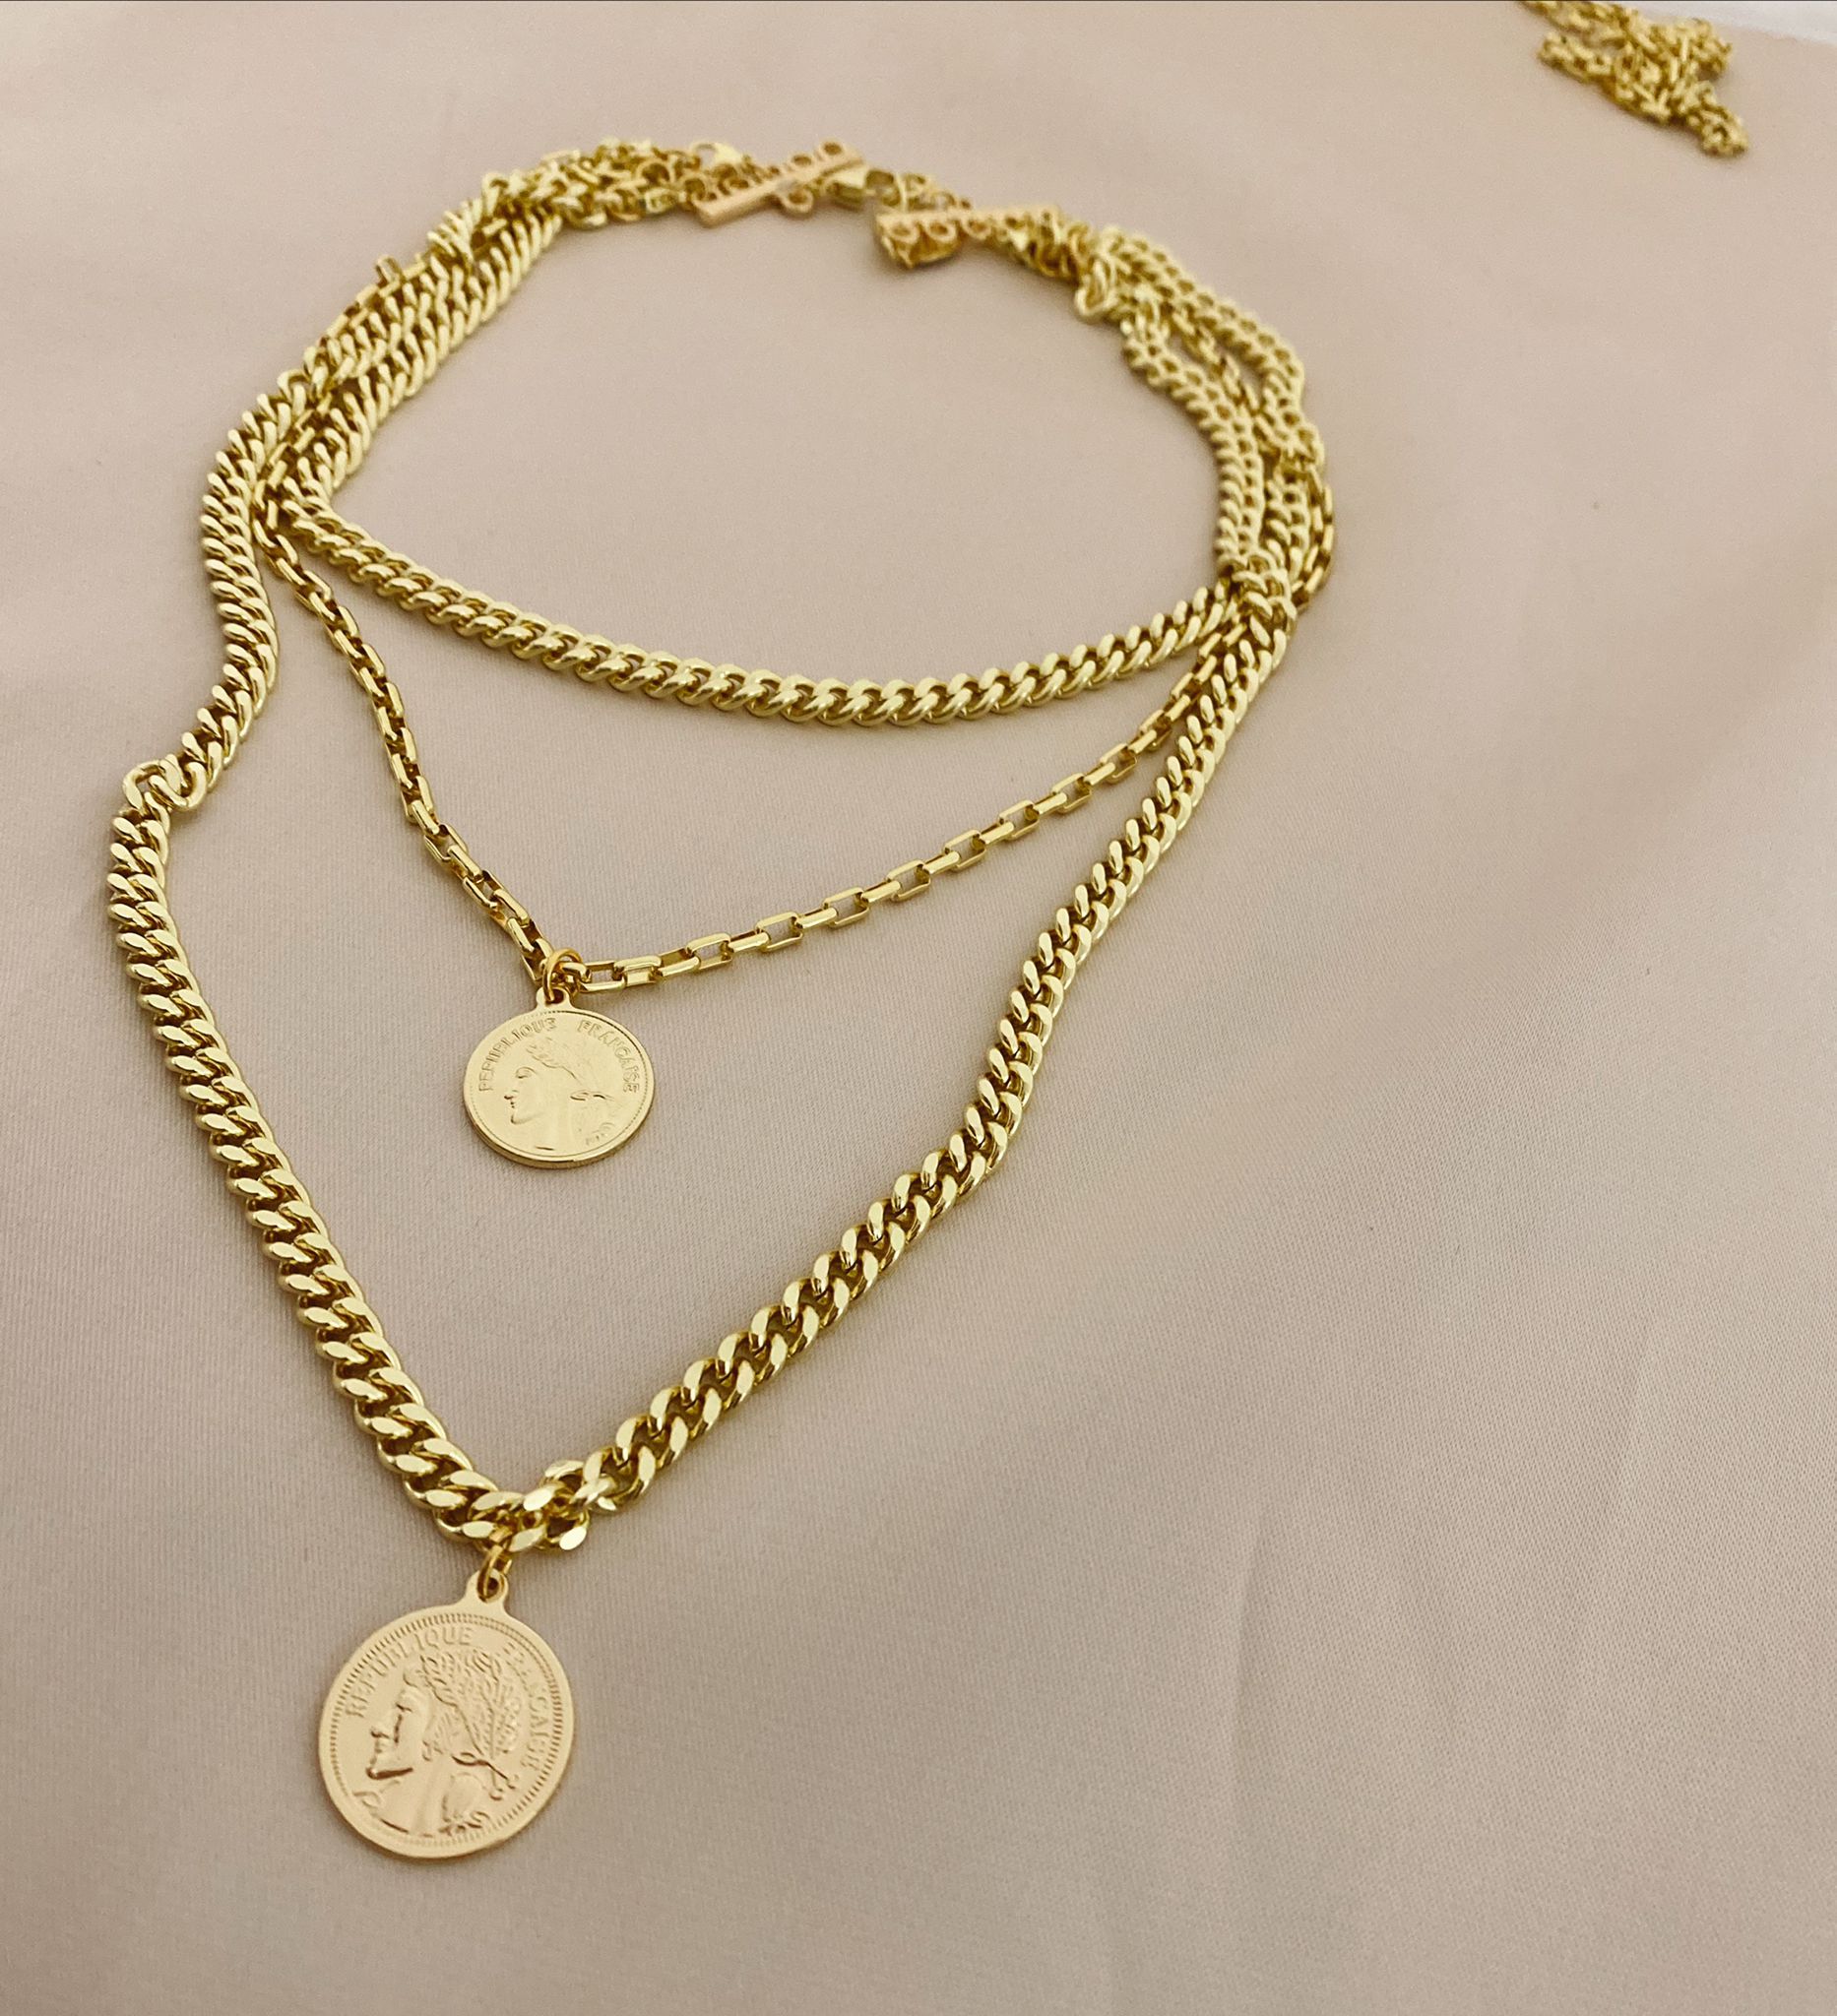 Triple Chain with Antique Medallion